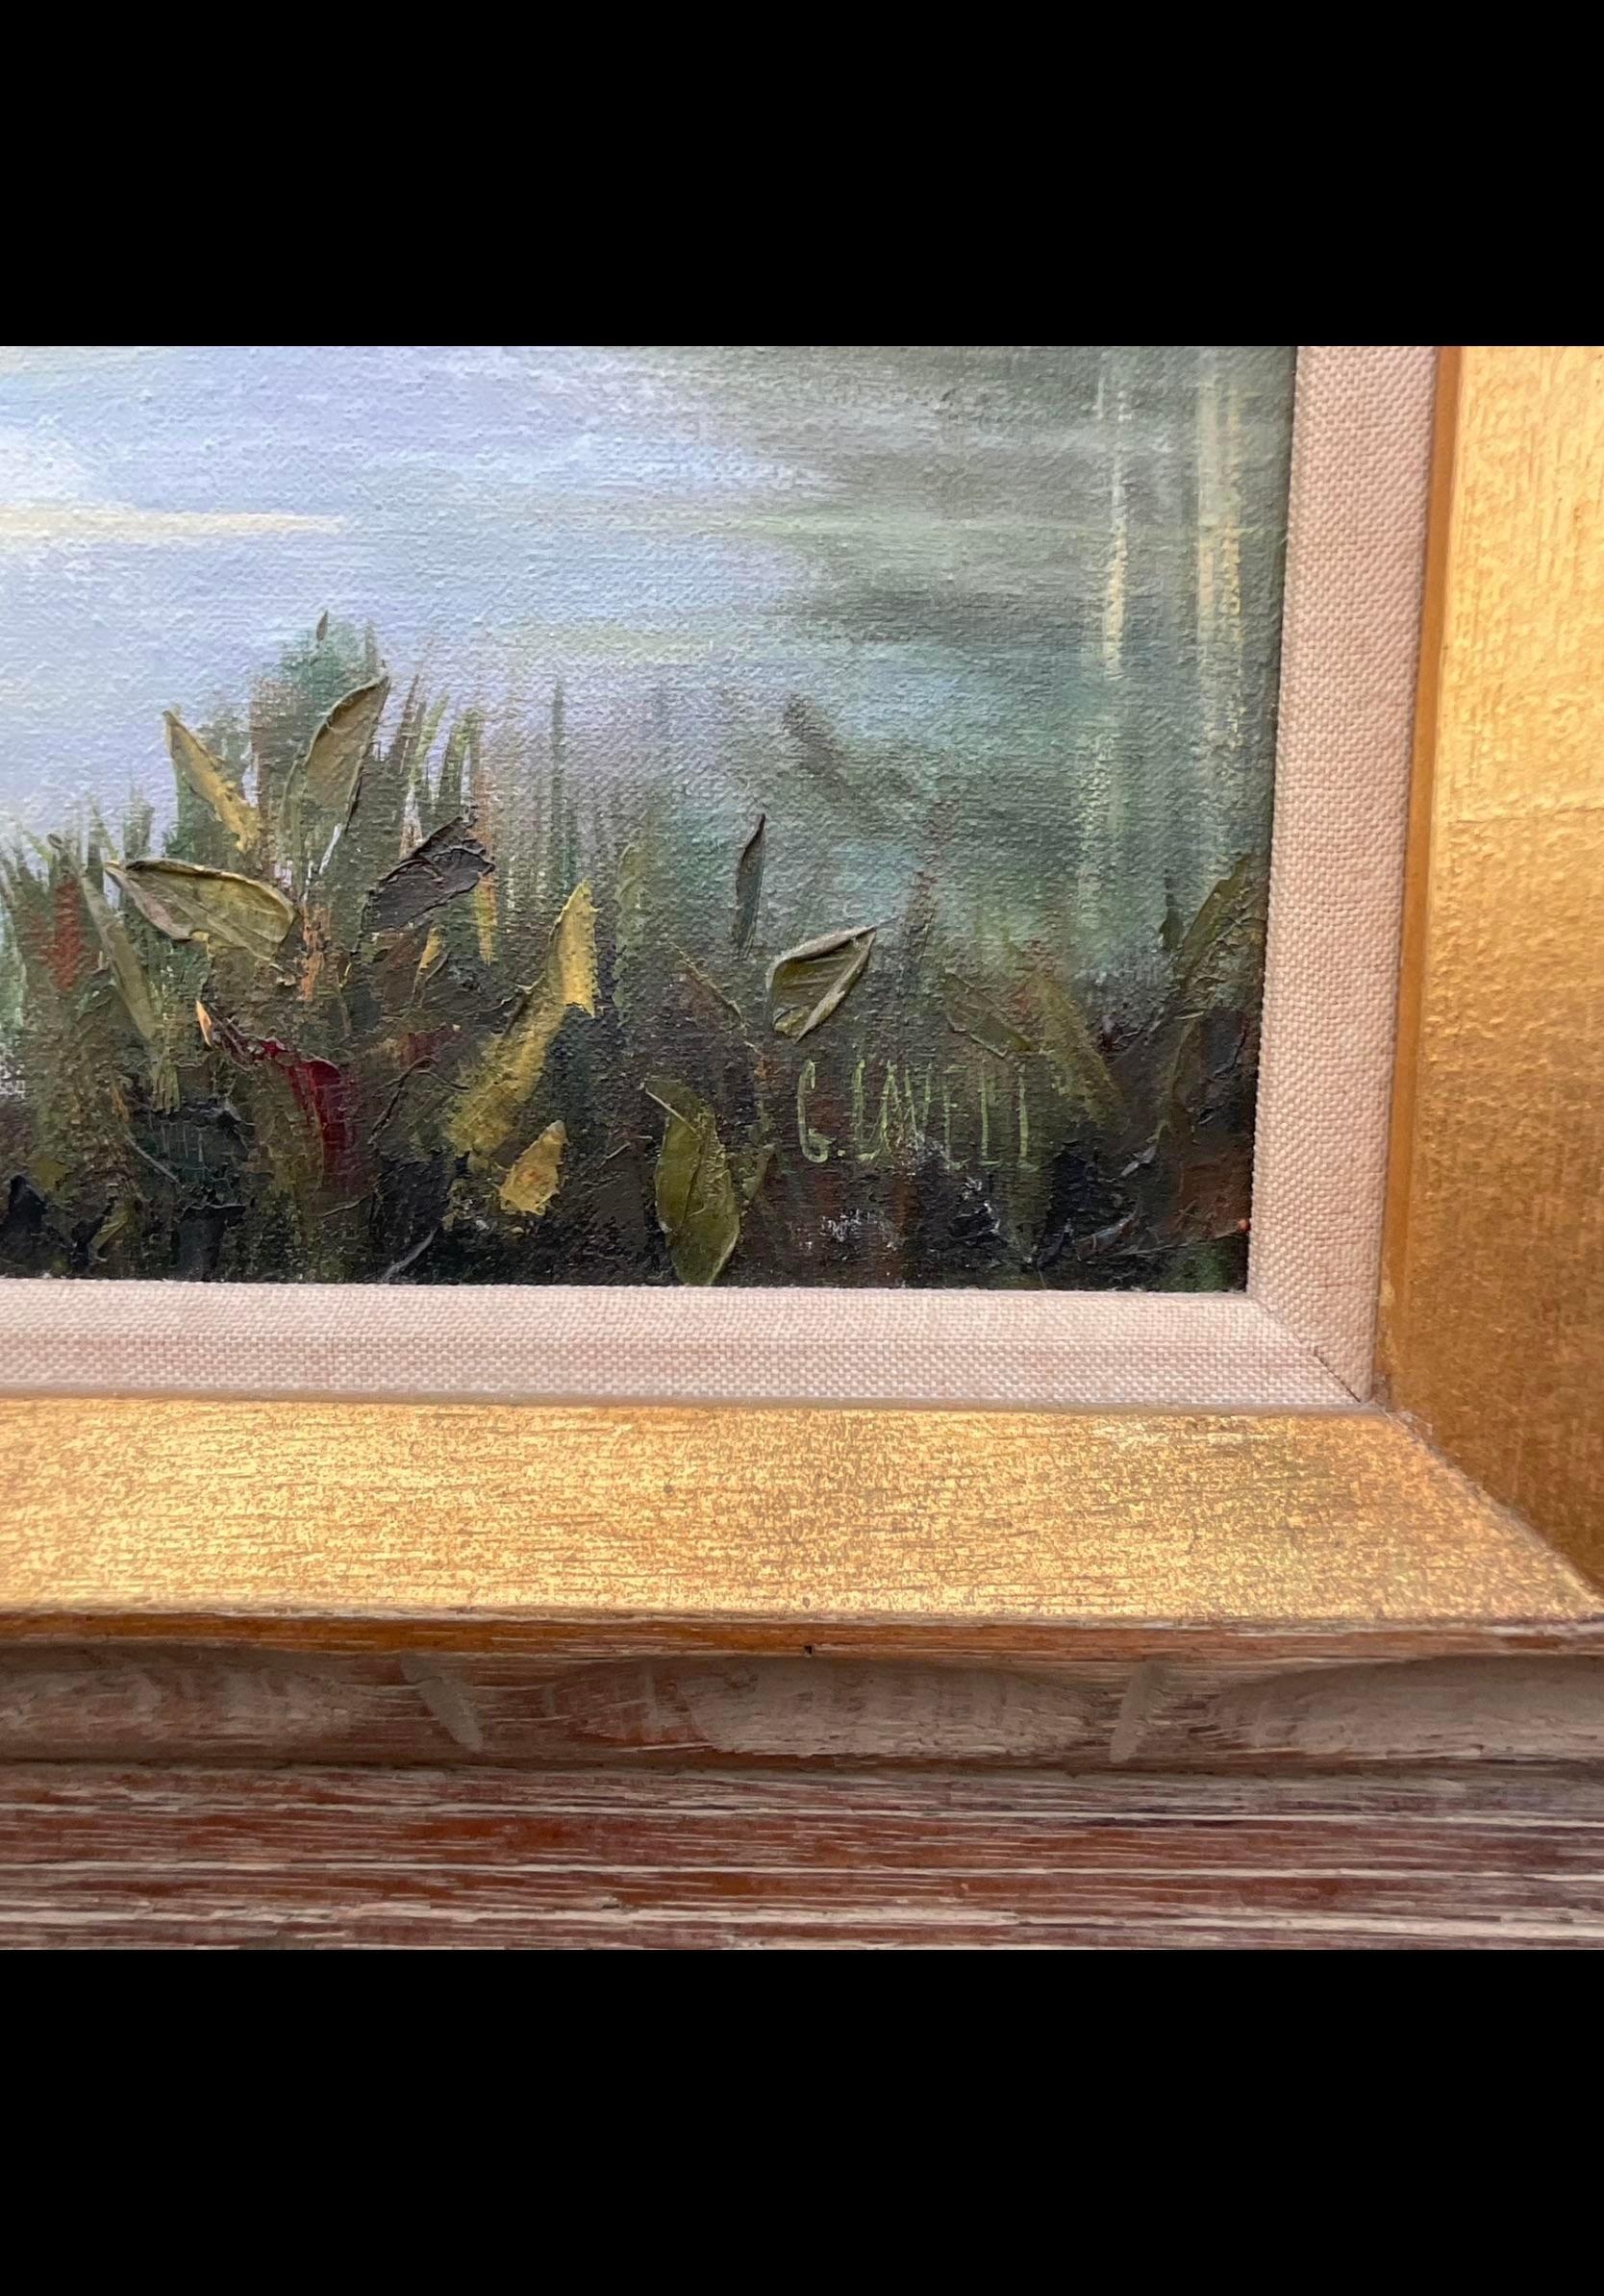 A fantastic vintage Original oil on canvas. A chic shoreline composition with beautiful palm trees. Signed by the artist. Beautiful framed in a watched carved frame. Acquired from a Palm Beach estate.